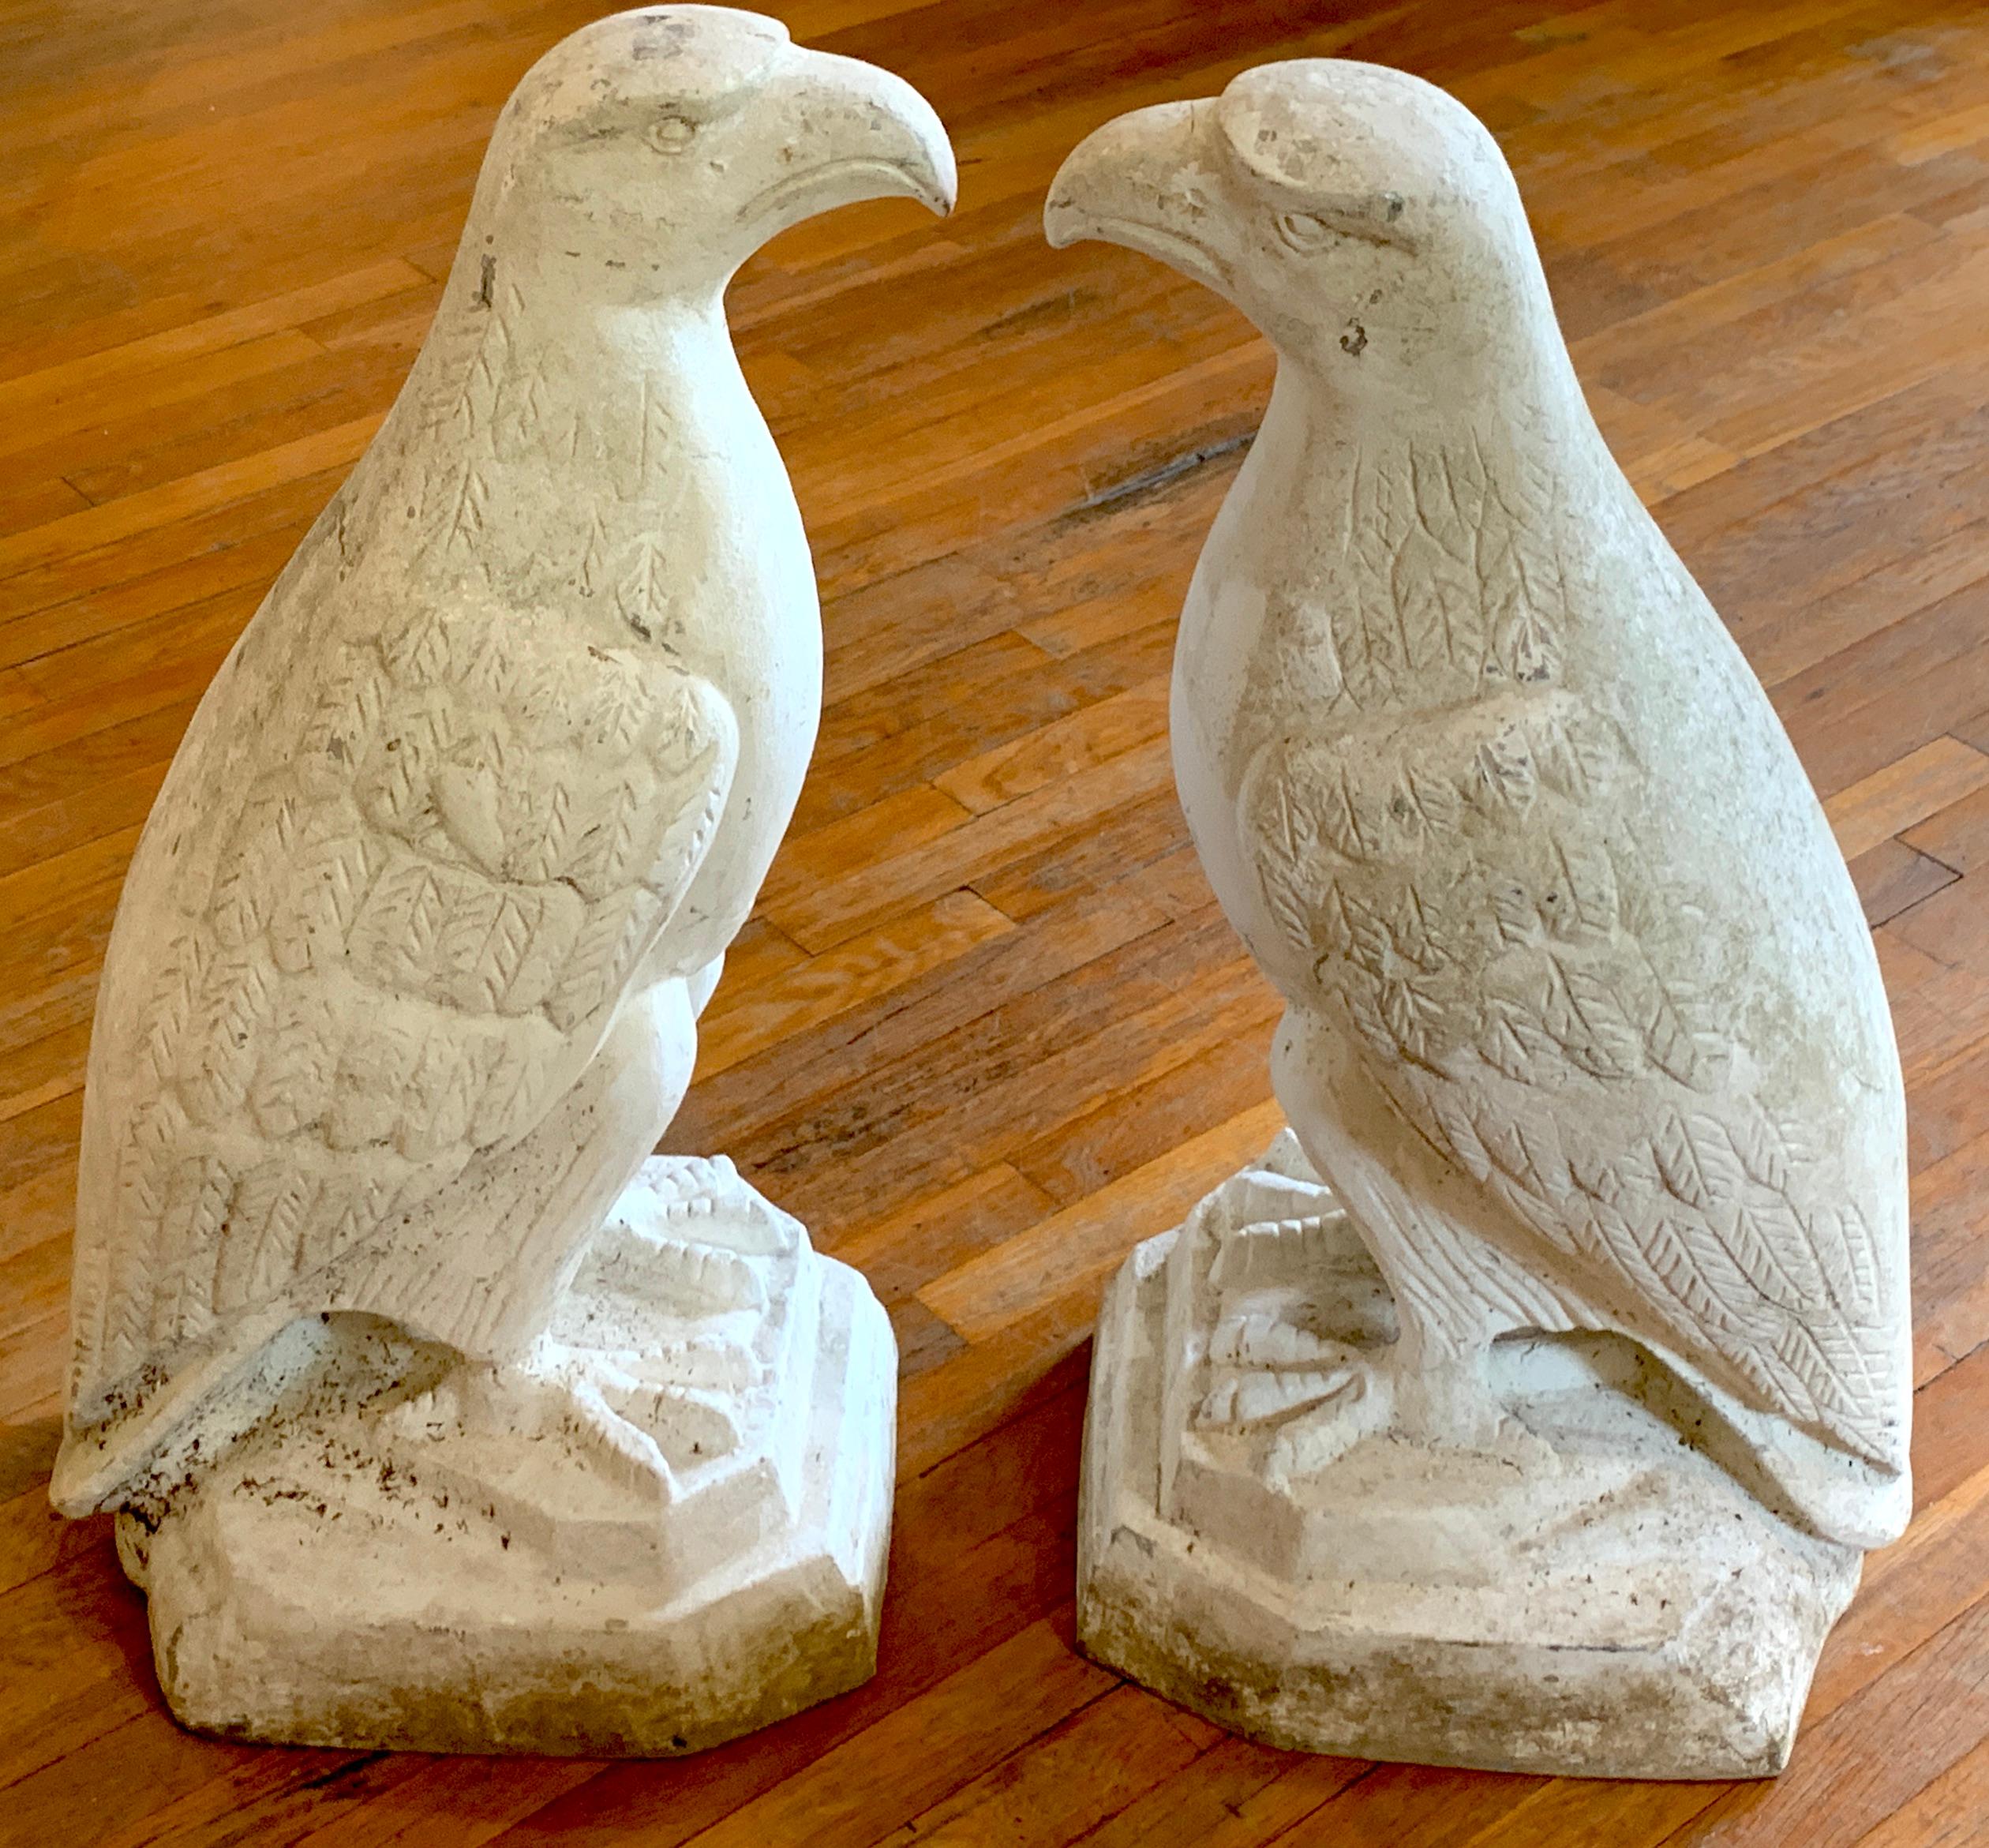 Pair of Art Deco cast aluminum seated garden eagles, each one a finely cast model of a seated eagle on plinth, retains old paint, beautiful patina.
The base measures 17